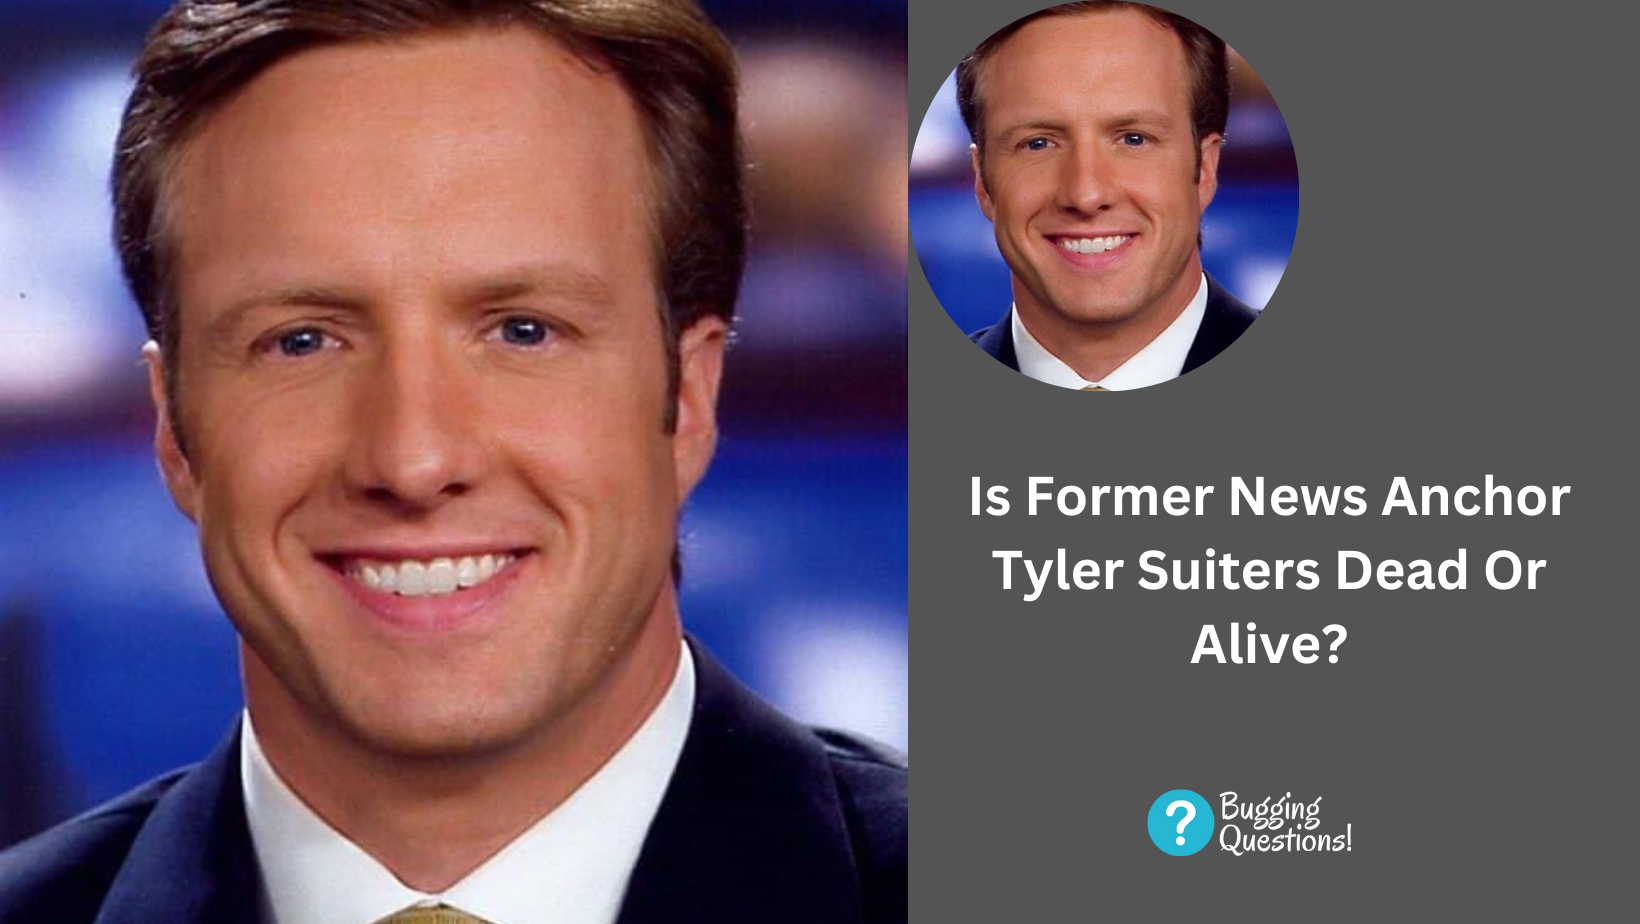 Is Former News Anchor Tyler Suiters Dead Or Alive?